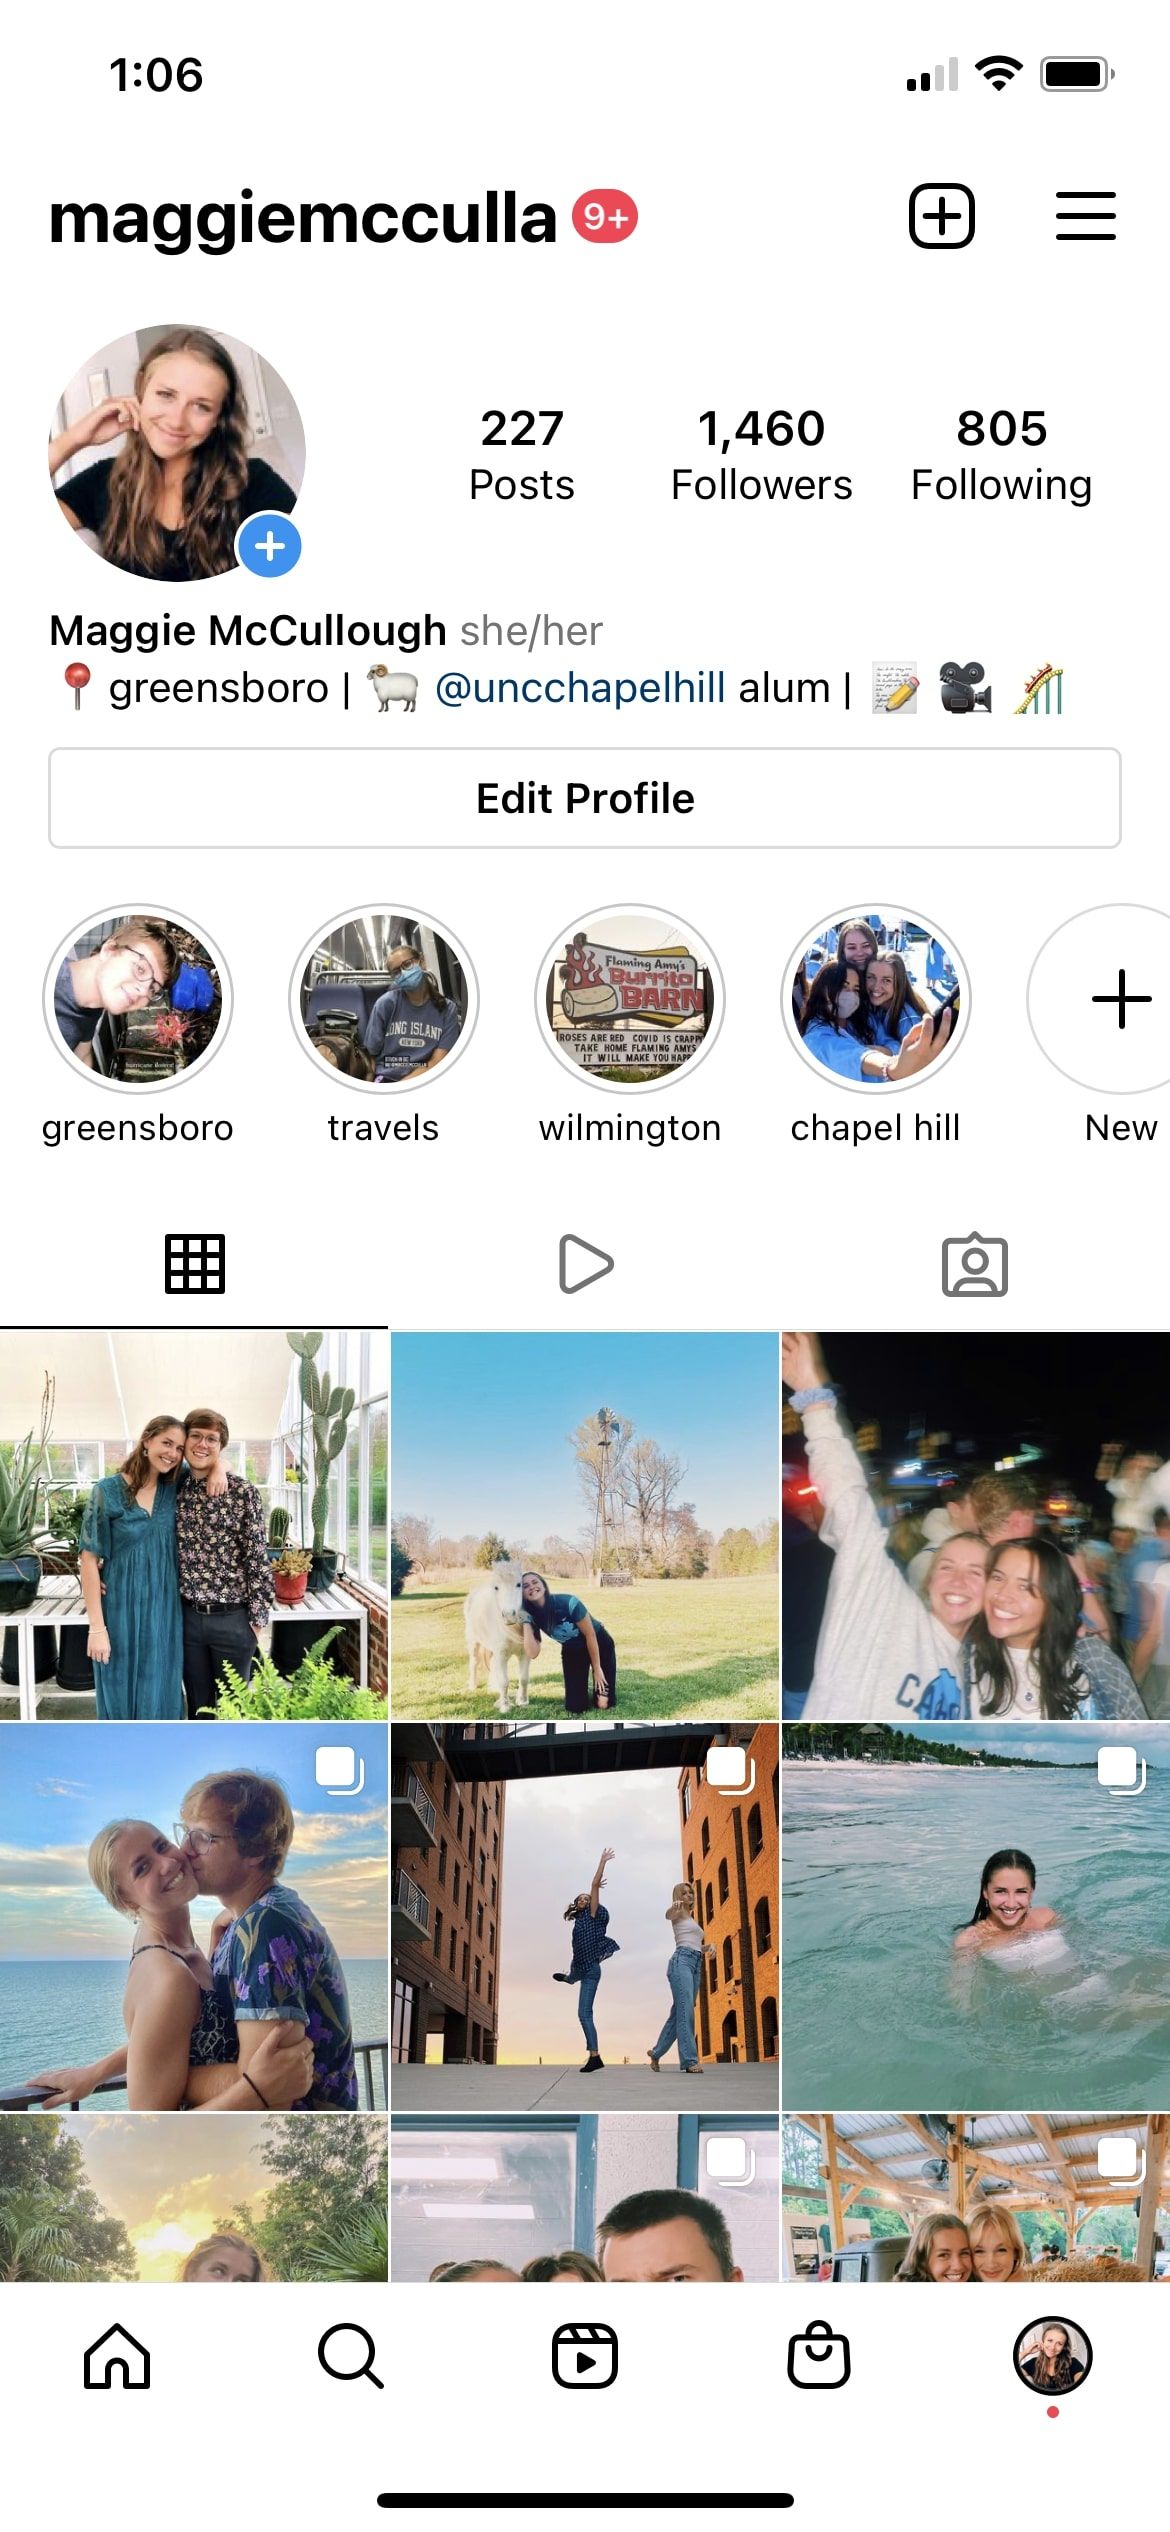 Screenshot of an Instagram profile page, lots of colorful photos